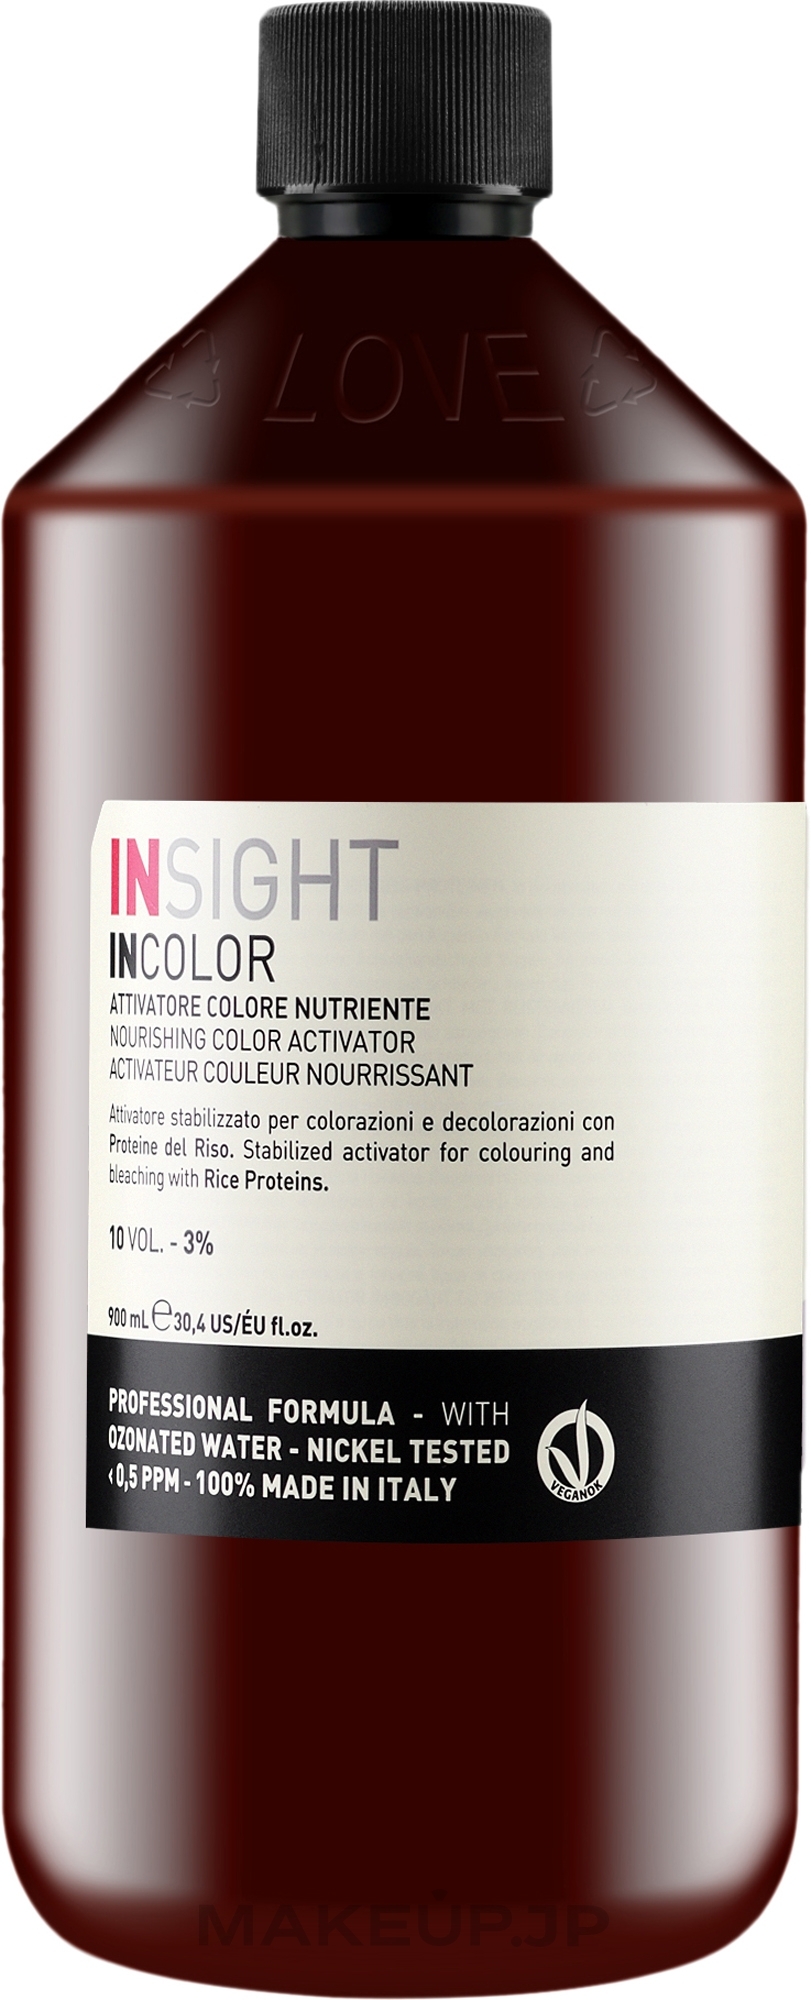 Protein Color Activator 3% - Insight Incolor Nourishing Color Activator Vol 10 — photo 900 ml